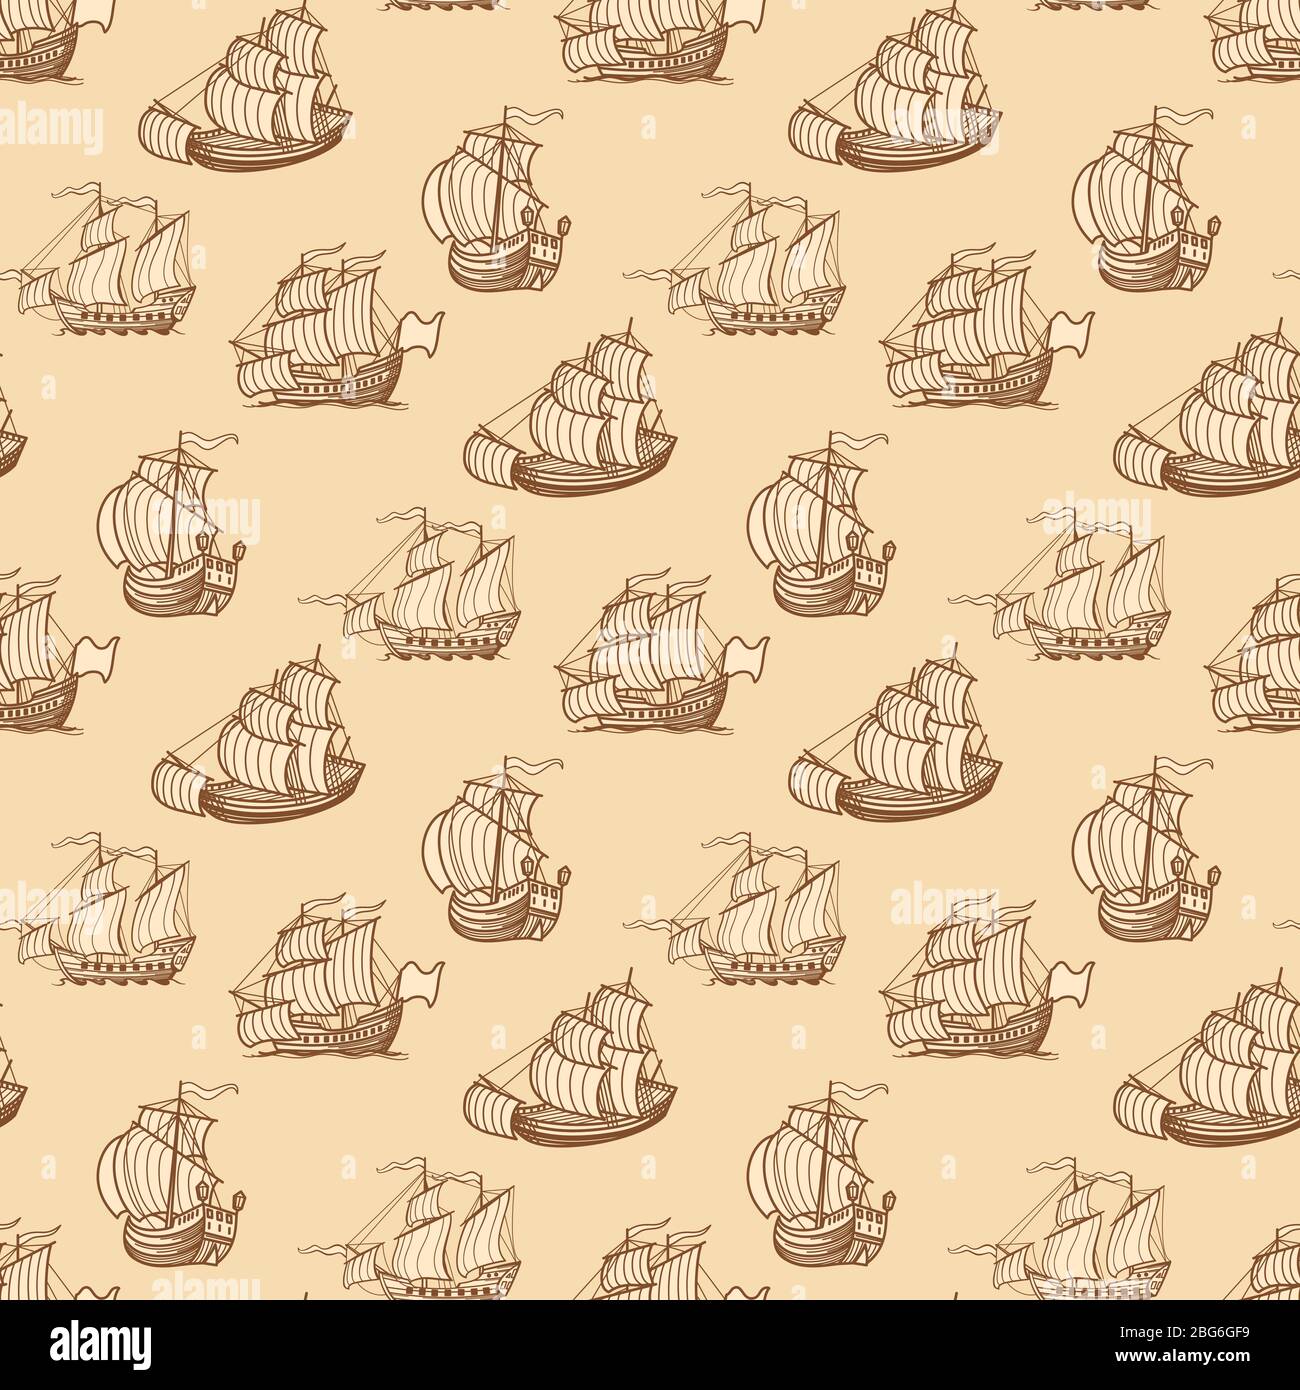 Vintage ships seamless pattern. Antique boats texture background. Vector illustration Stock Vector